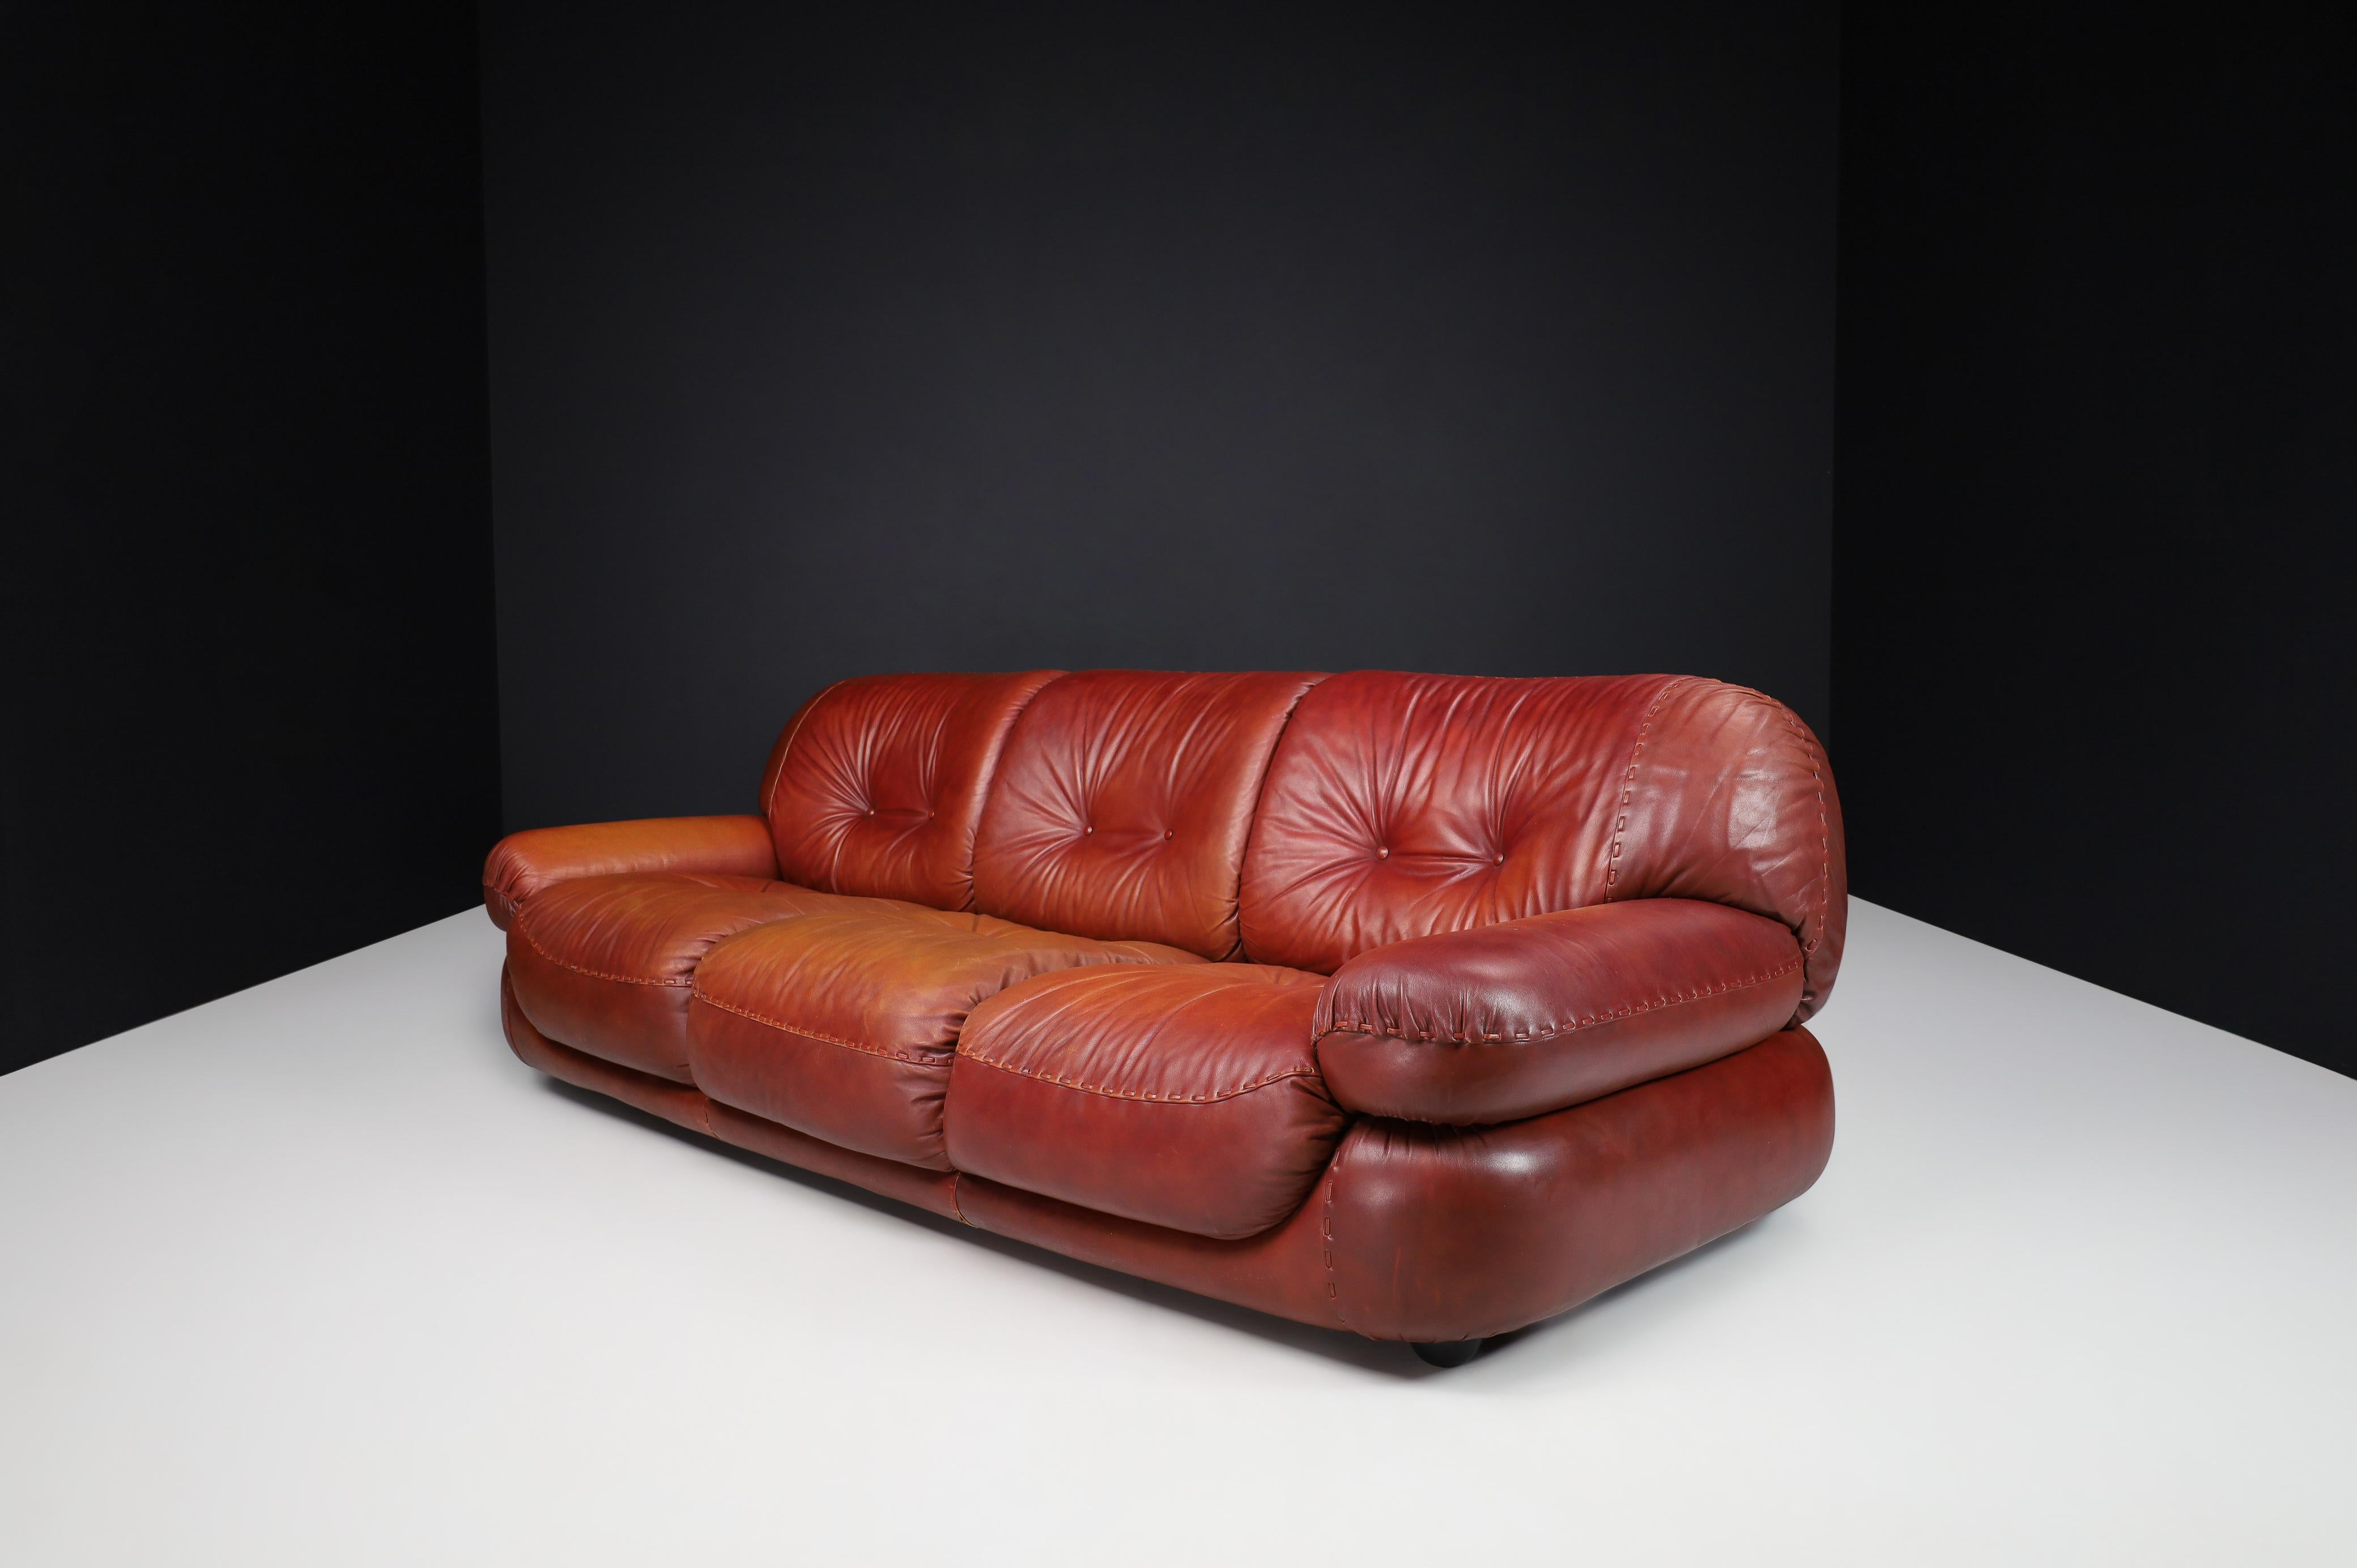 Large Lounge Sofa in Patinated Firebrick Leather by Sapporo for Mobil Girgi, Italy 1970

A large lounge sofa in leather by Sapporo for Mobil Girgi, Italy, in the 1970s. A large, fluffy, stylish lounge sofa that feature round lines and shapes